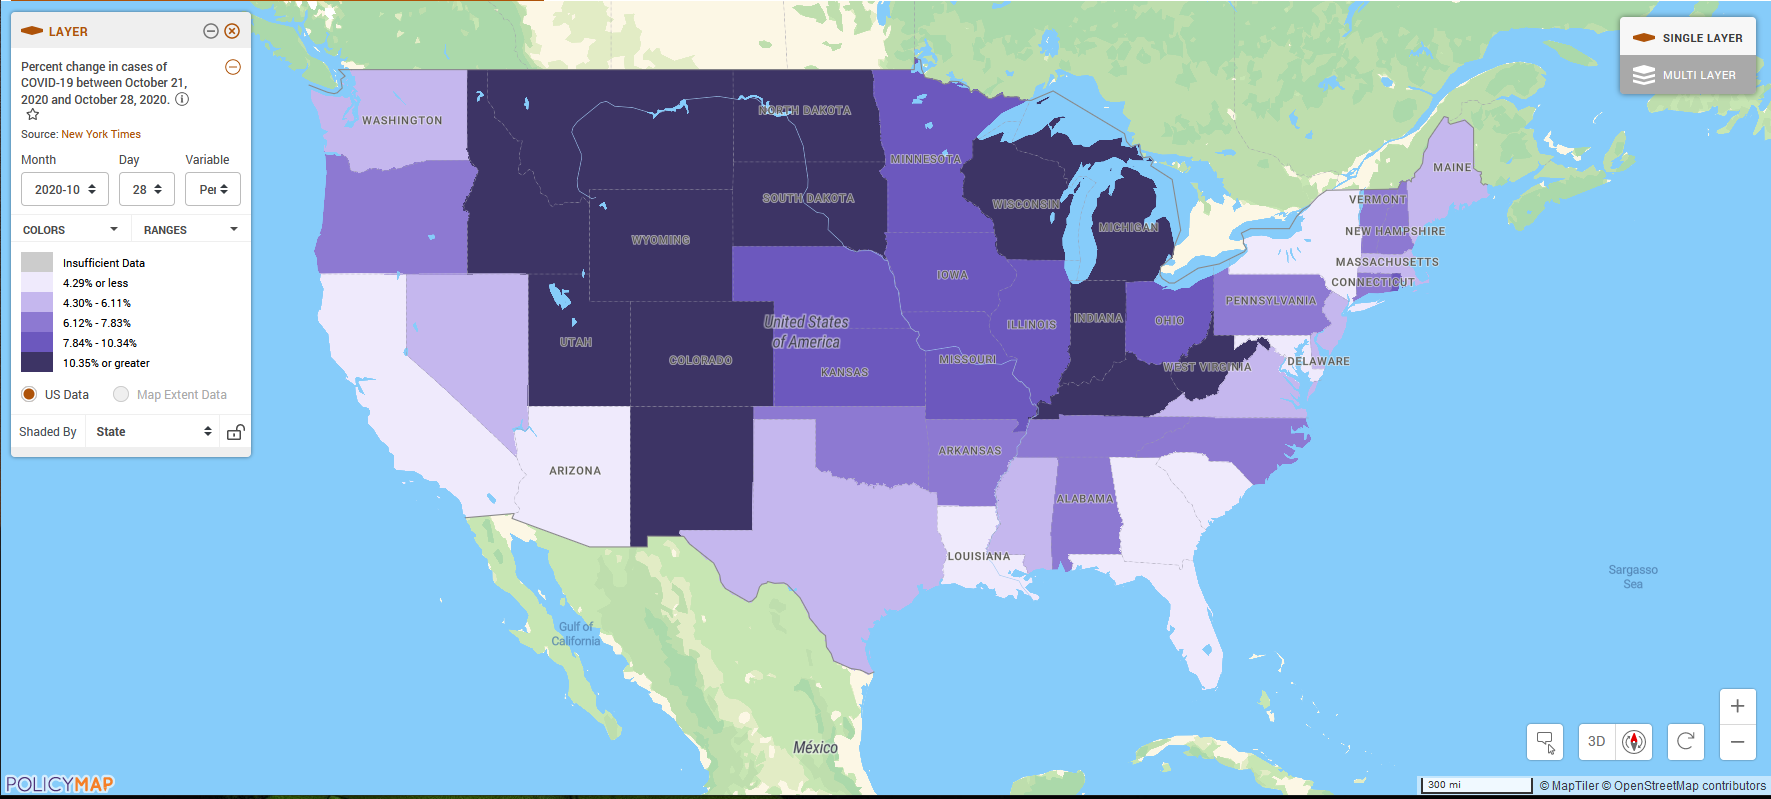 Map of the United States shows a seven-day percent change in COVID-19 cases. States in the upper mid-west - North and South Dakota, Montana, Wyoming, Idaho, and Wisconsin have the most significant percent change in cases. 